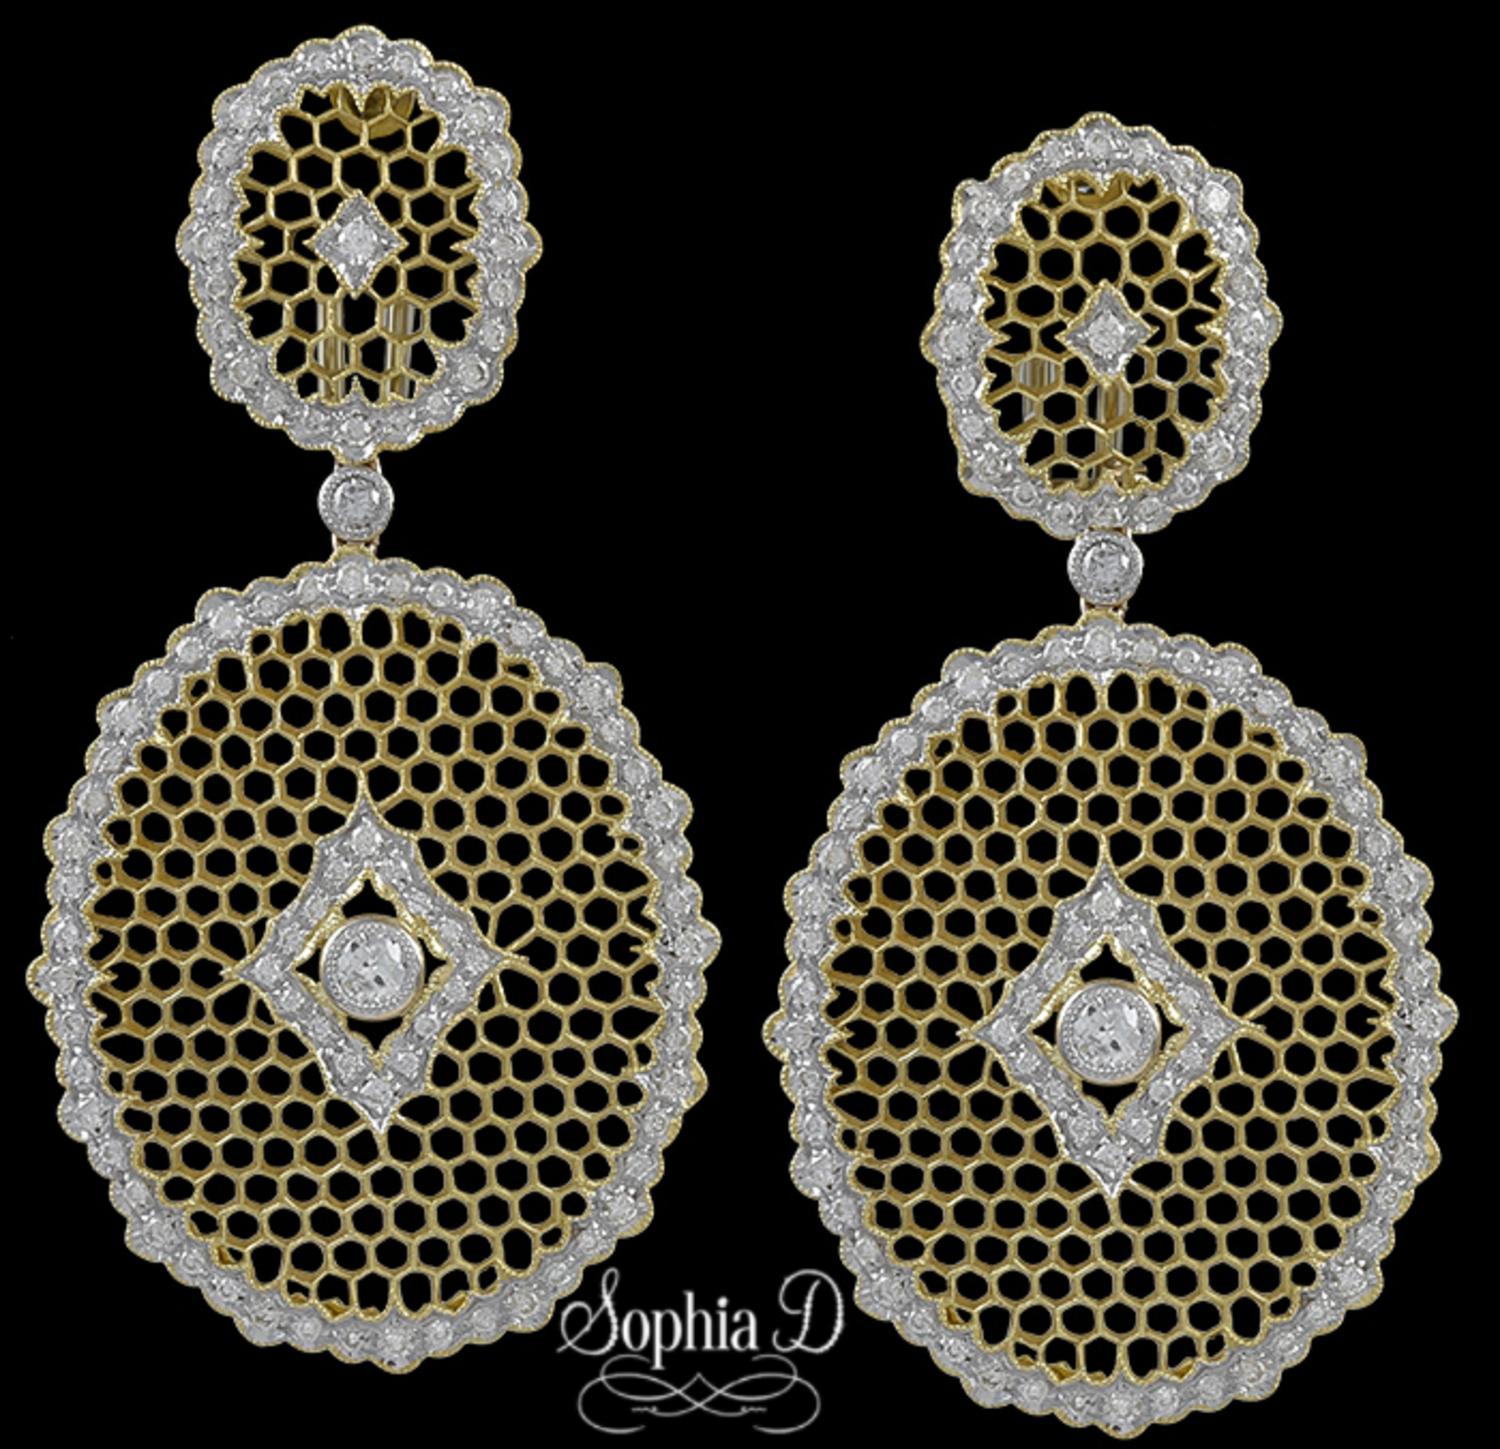  Sophia D 18 karat yellow gold earrings with 2.08 carats diamonds.

Sophia D by Joseph Dardashti LTD has been known worldwide for 35 years and are inspired by classic Art Deco design that merges with modern manufacturing techniques.